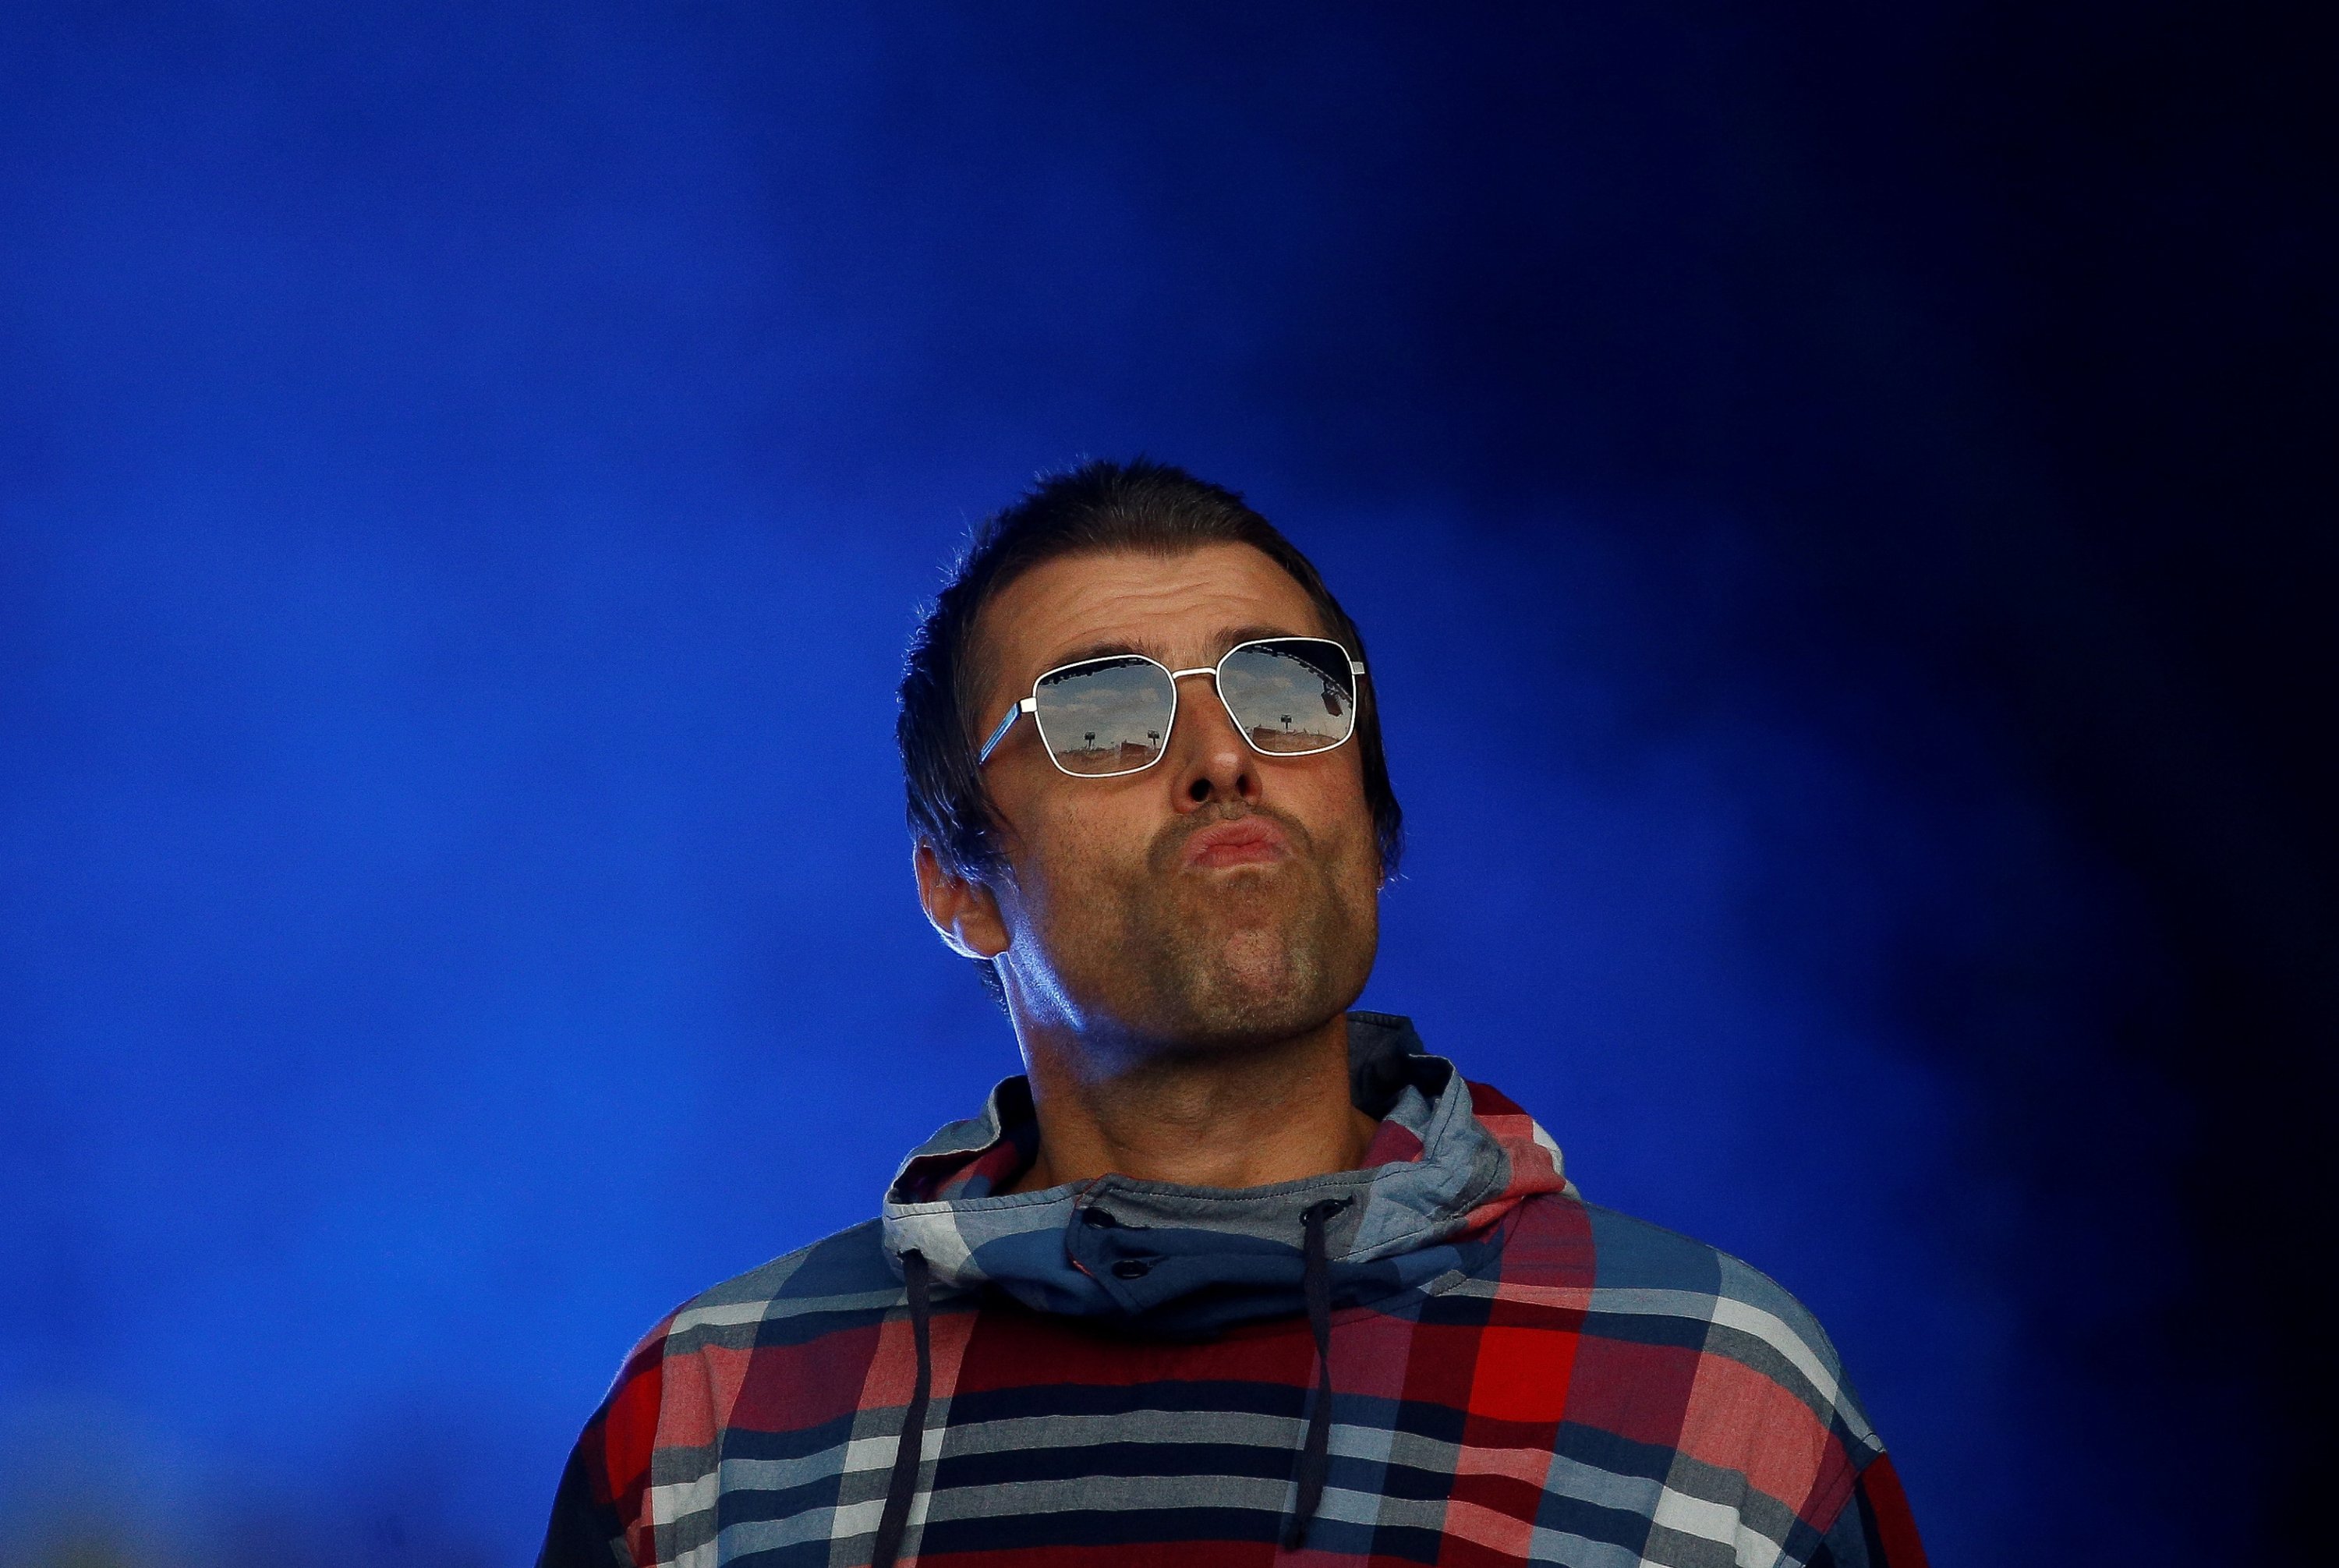 Liam Gallagher performs on the Pyramid stage during Glastonbury Festival in Somerset, Britain, June 29, 2019. (REUTERS Photo)